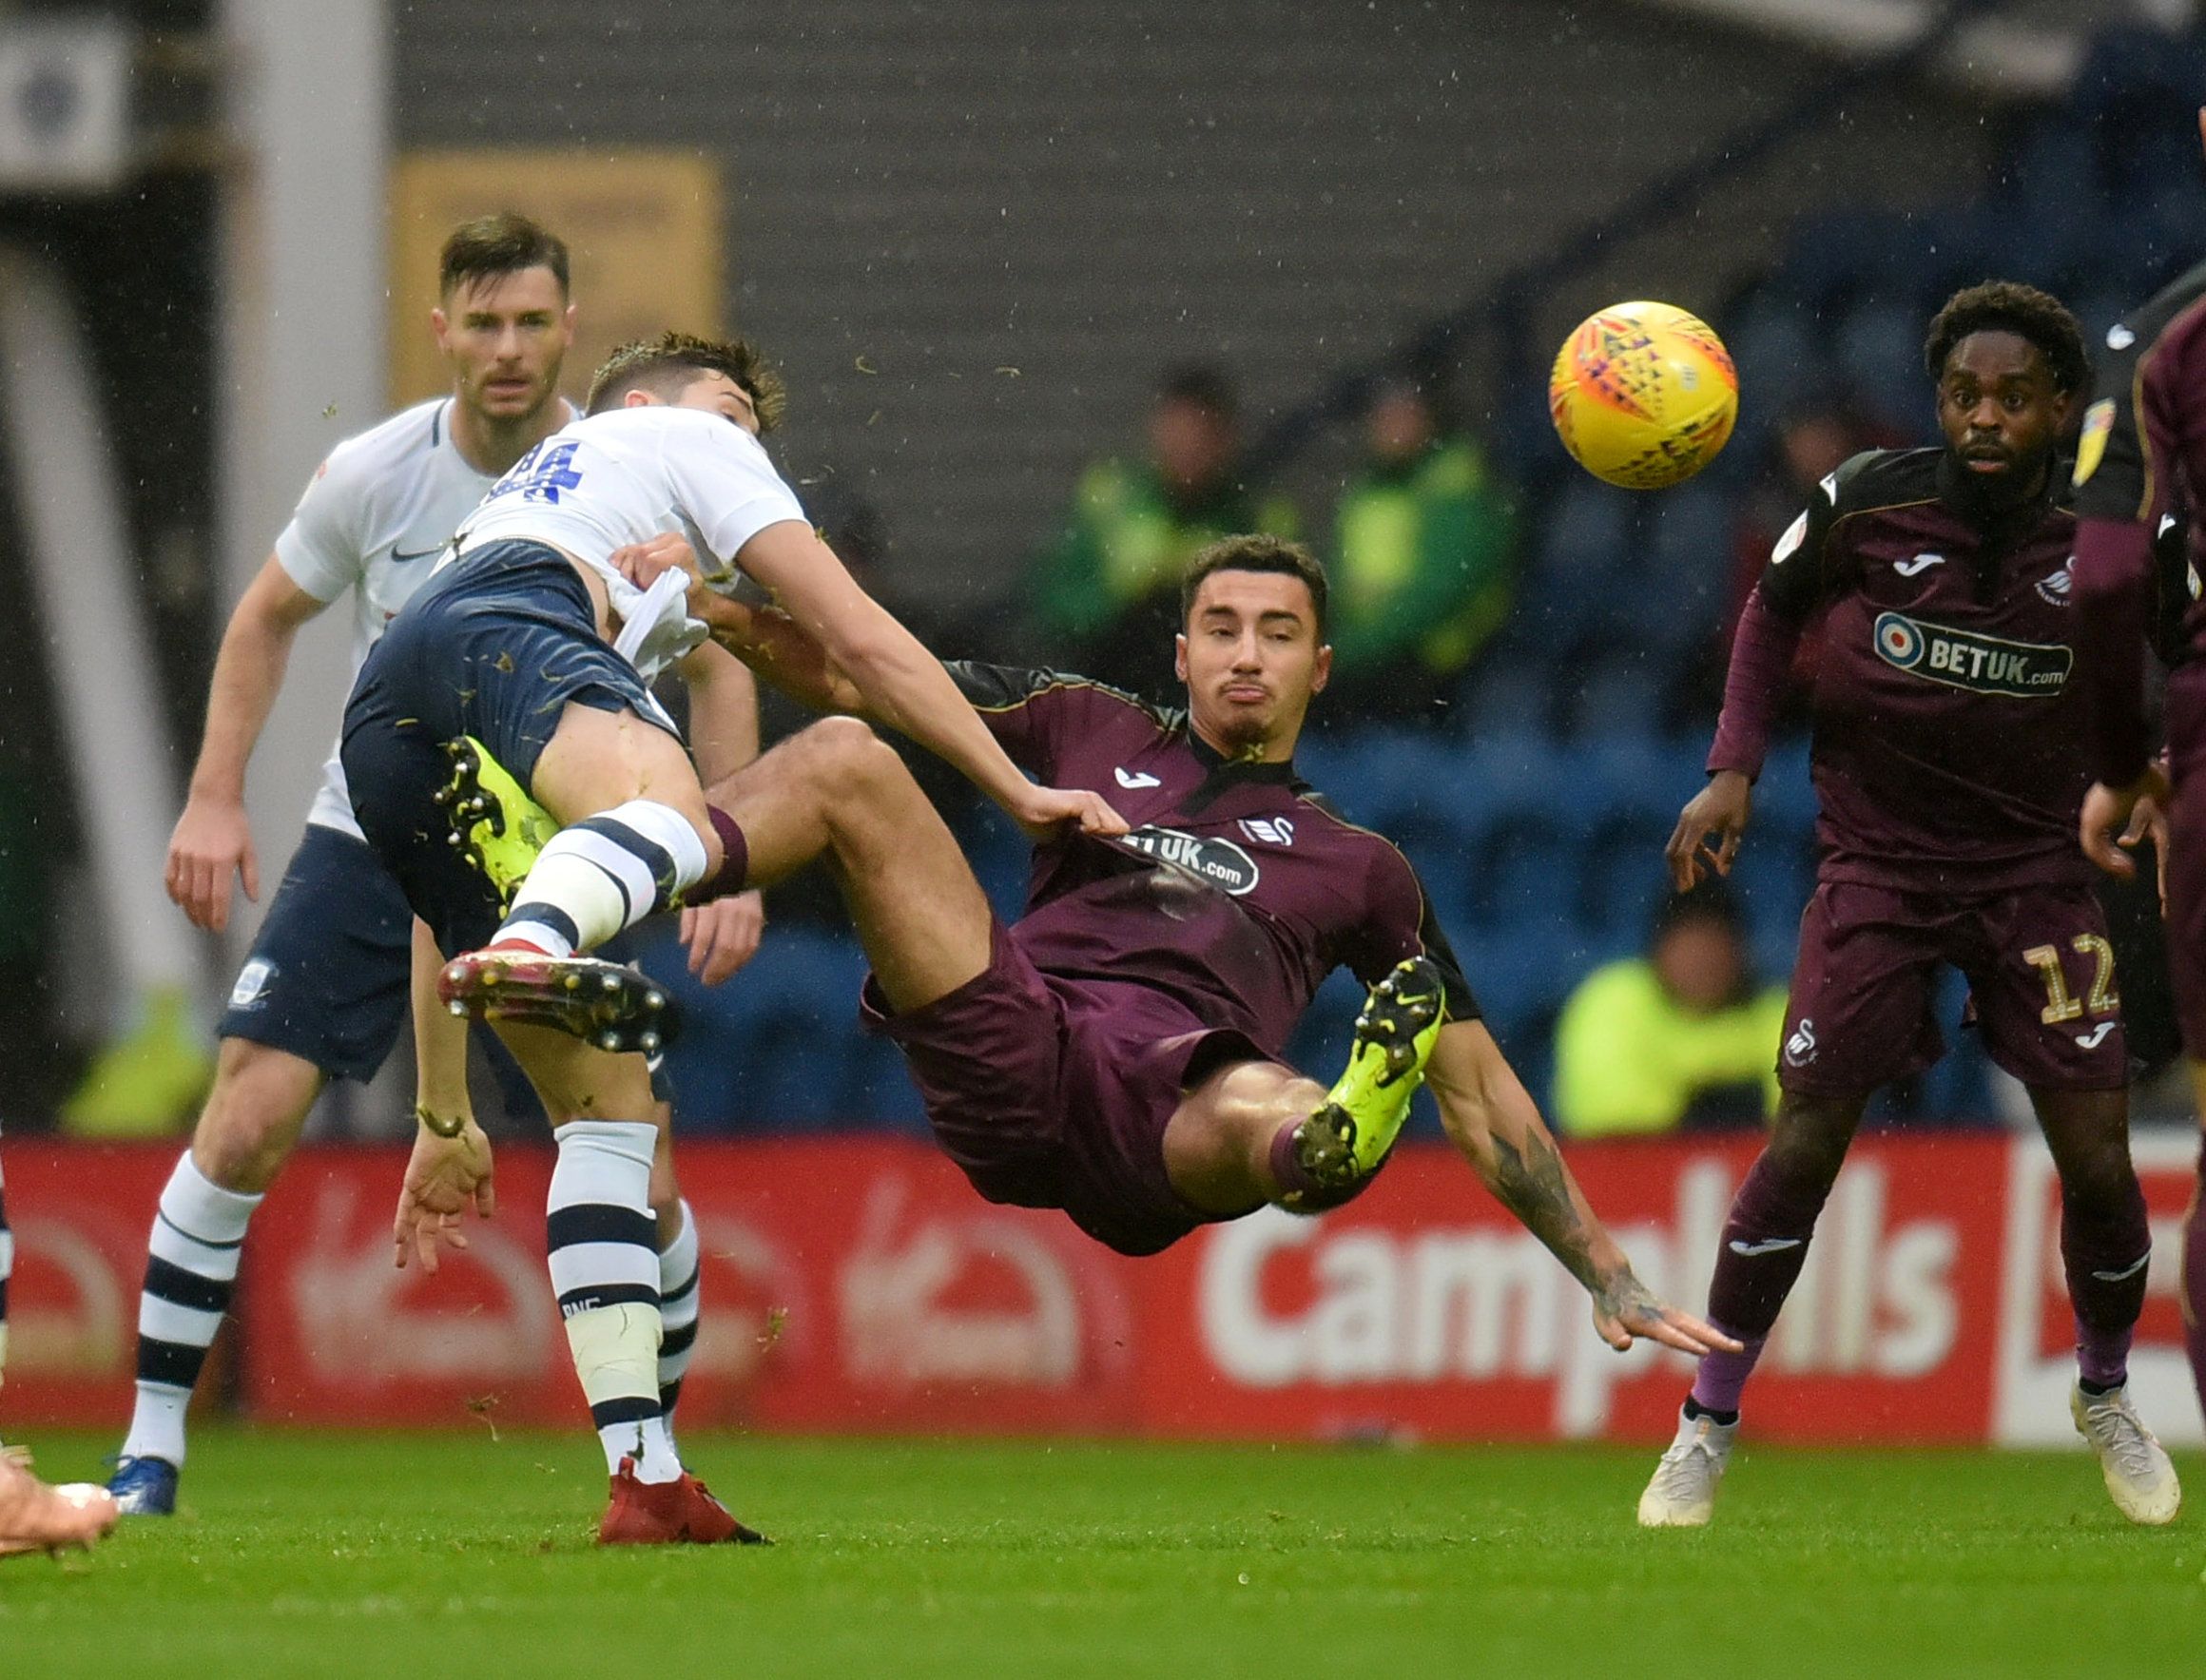 Soccer Football - Championship - Preston North End v Swansea City - Deepdale, Preston, Britain - January 12, 2019   Preston's Jordan Storey in action with Swansea's Courtney Baker-Richardson   Action Images/Paul Burrows    EDITORIAL USE ONLY. No use with unauthorized audio, video, data, fixture lists, club/league logos or 